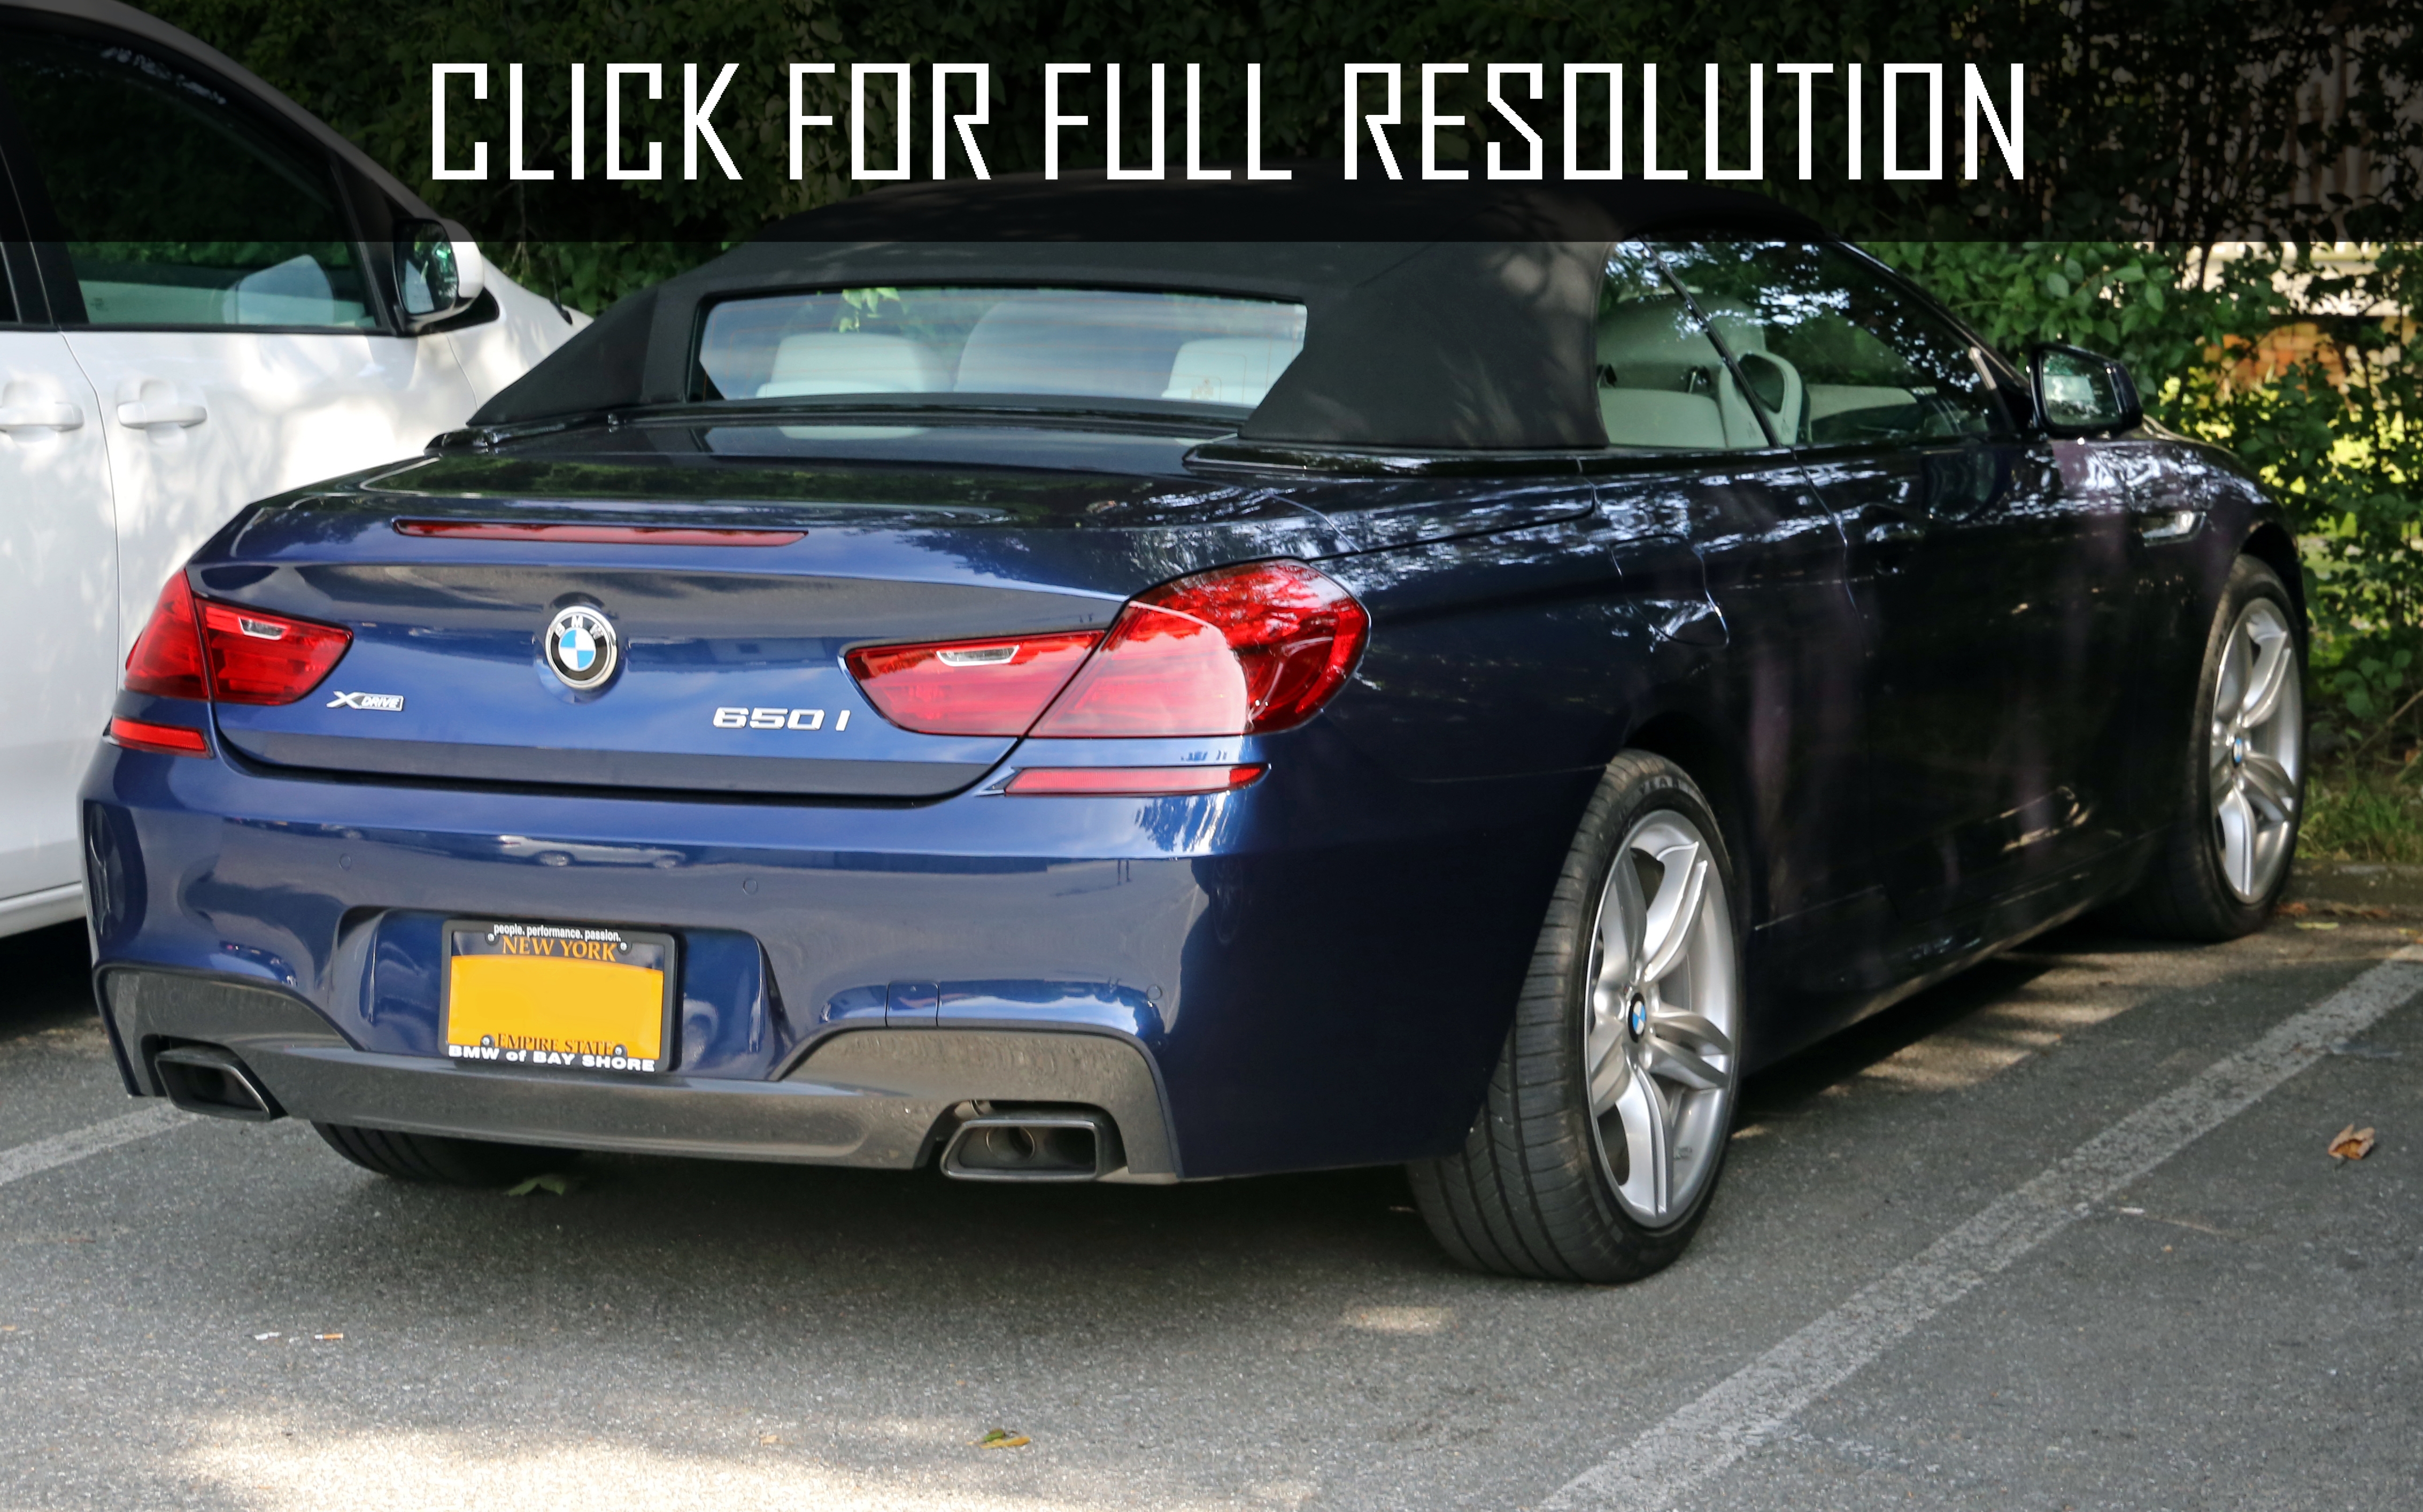 Bmw 6 Series Hardtop Convertible For Sale - amazing photo gallery, some